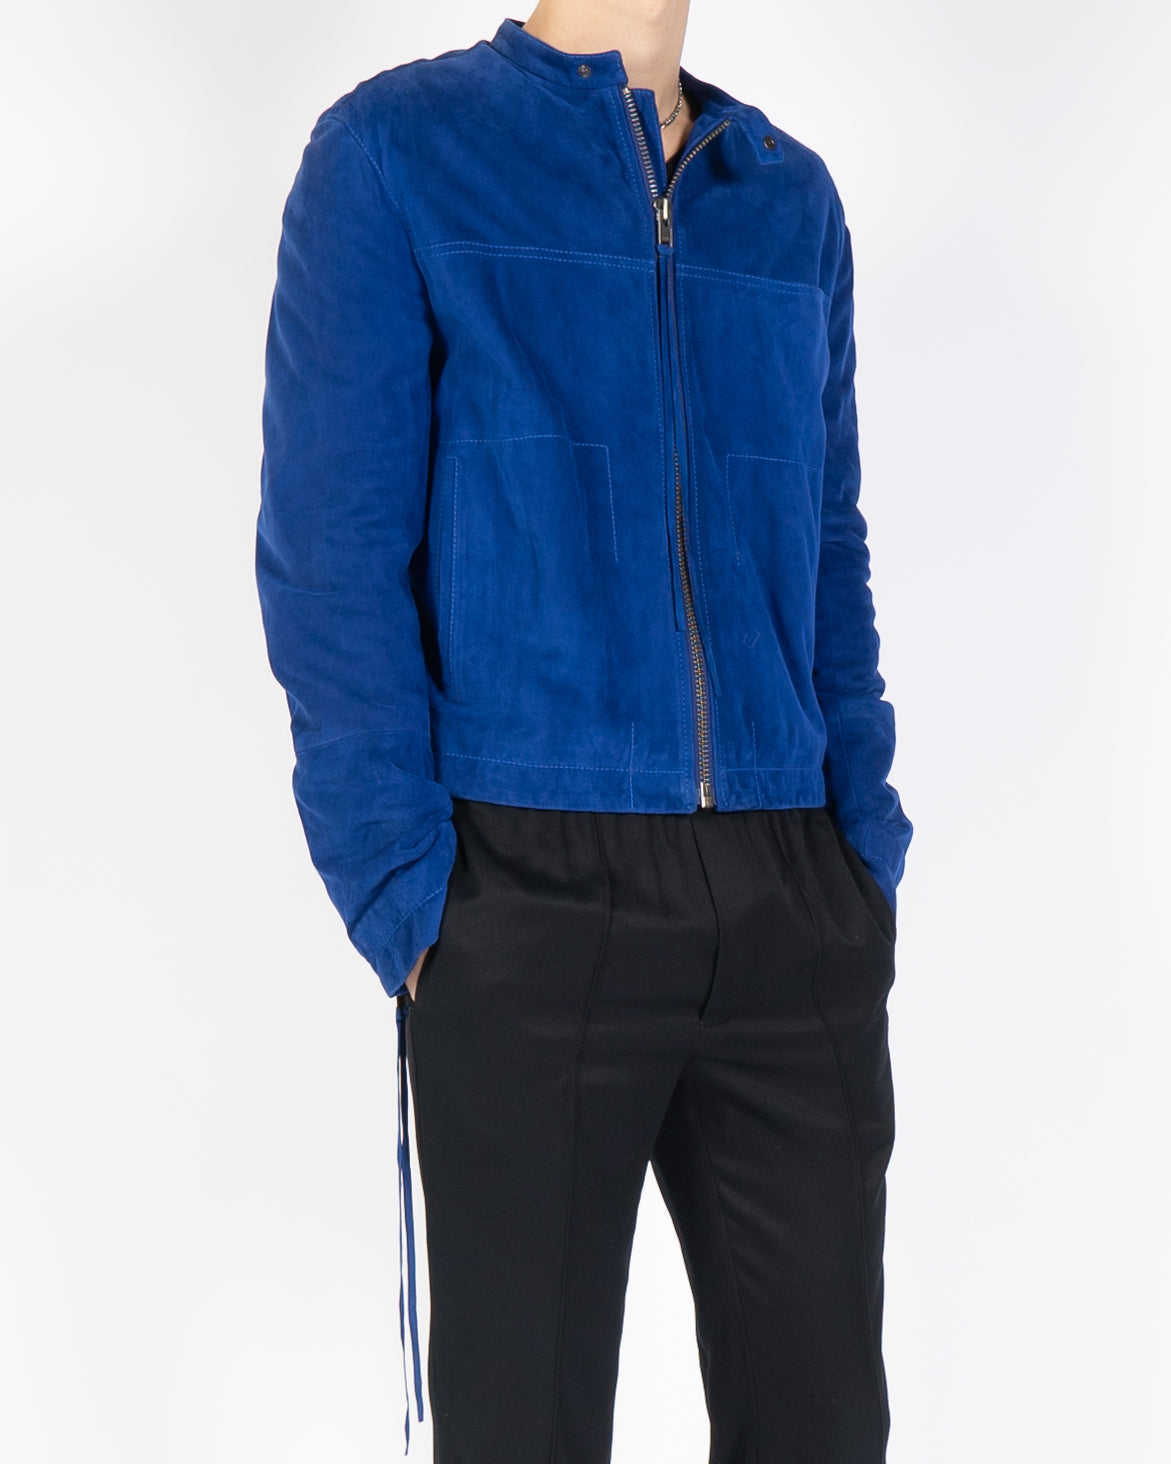 SS18 Blue Suede Leather Zipped Jacket